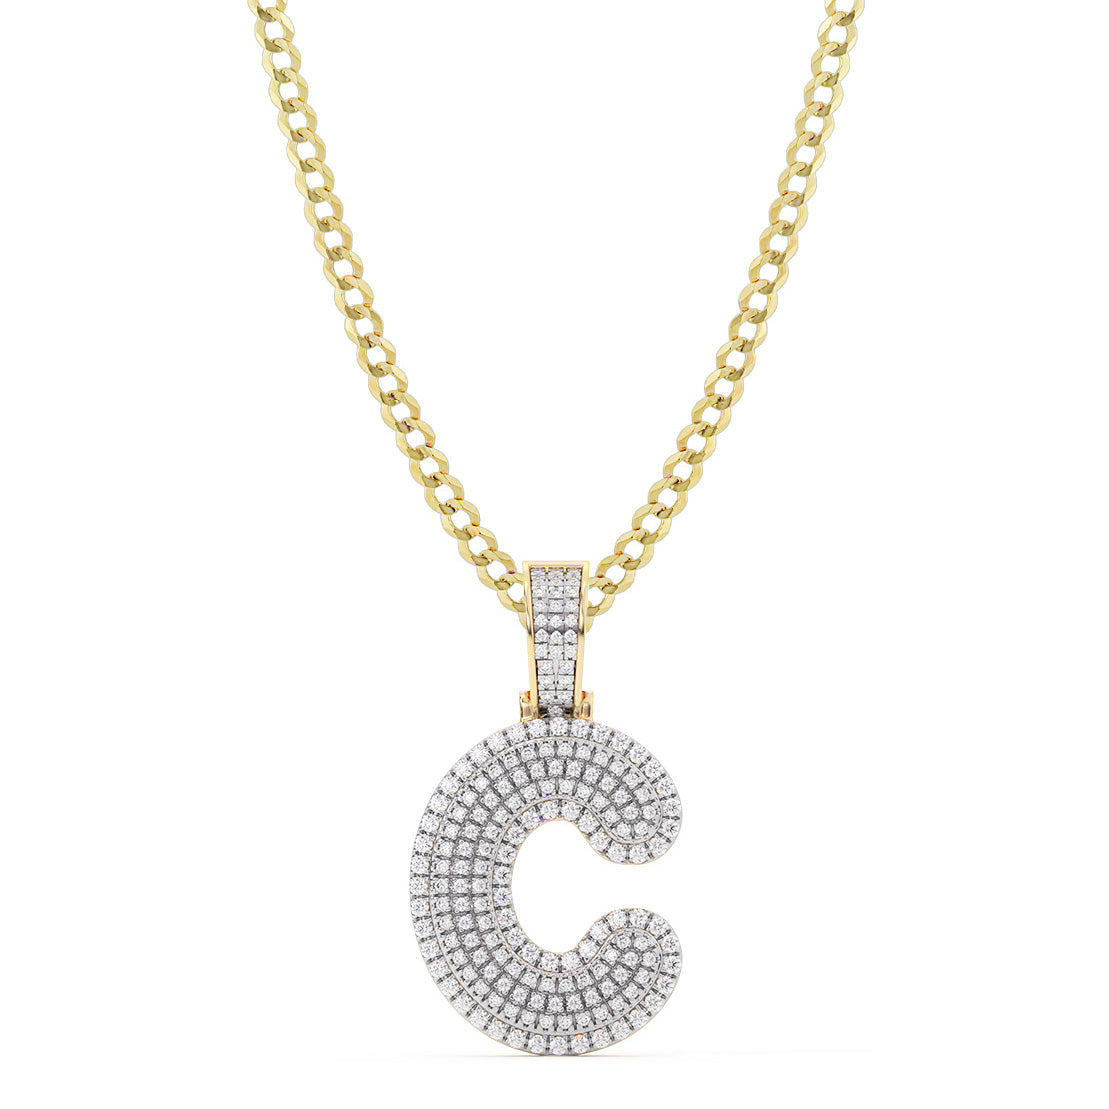 Women's Diamond "C" Initial Letter Necklace 0.34ct Solid 10K Yellow Gold